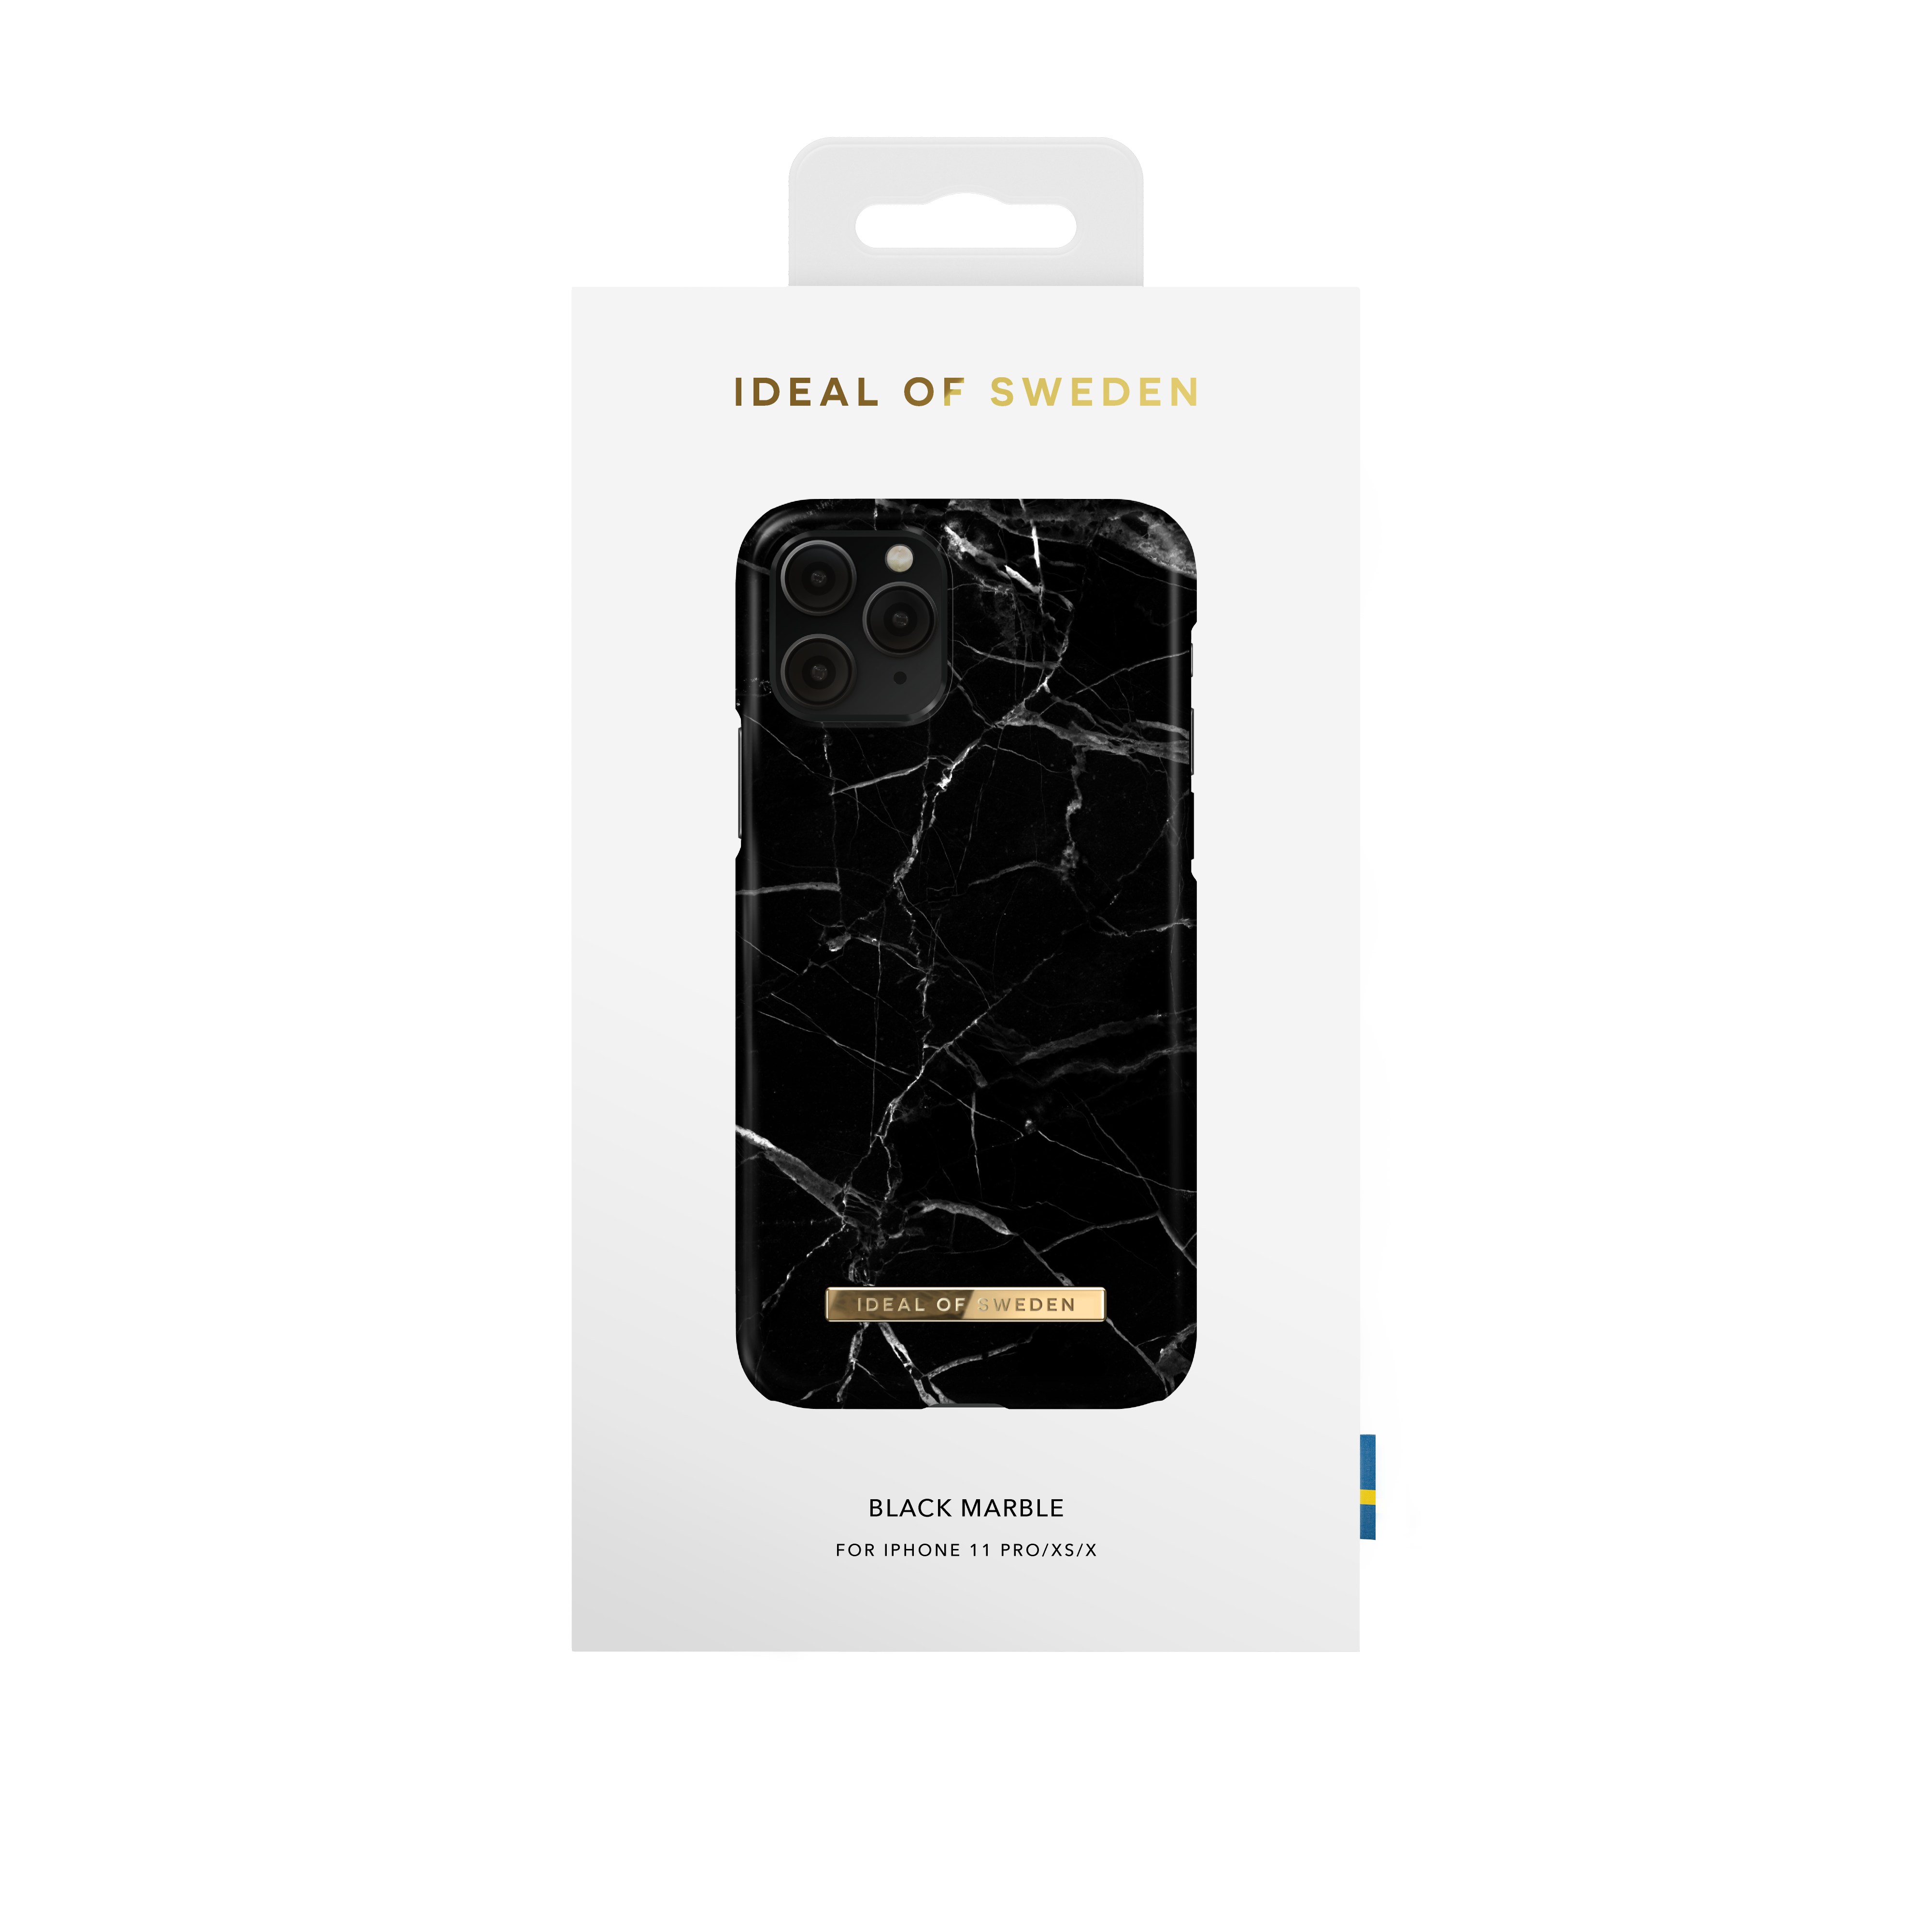 SWEDEN 11 iPhone iPhone X, Pro, iPhone OF Apple, Marble IDFC-I1958-21, IDEAL Backcover, Black XS,